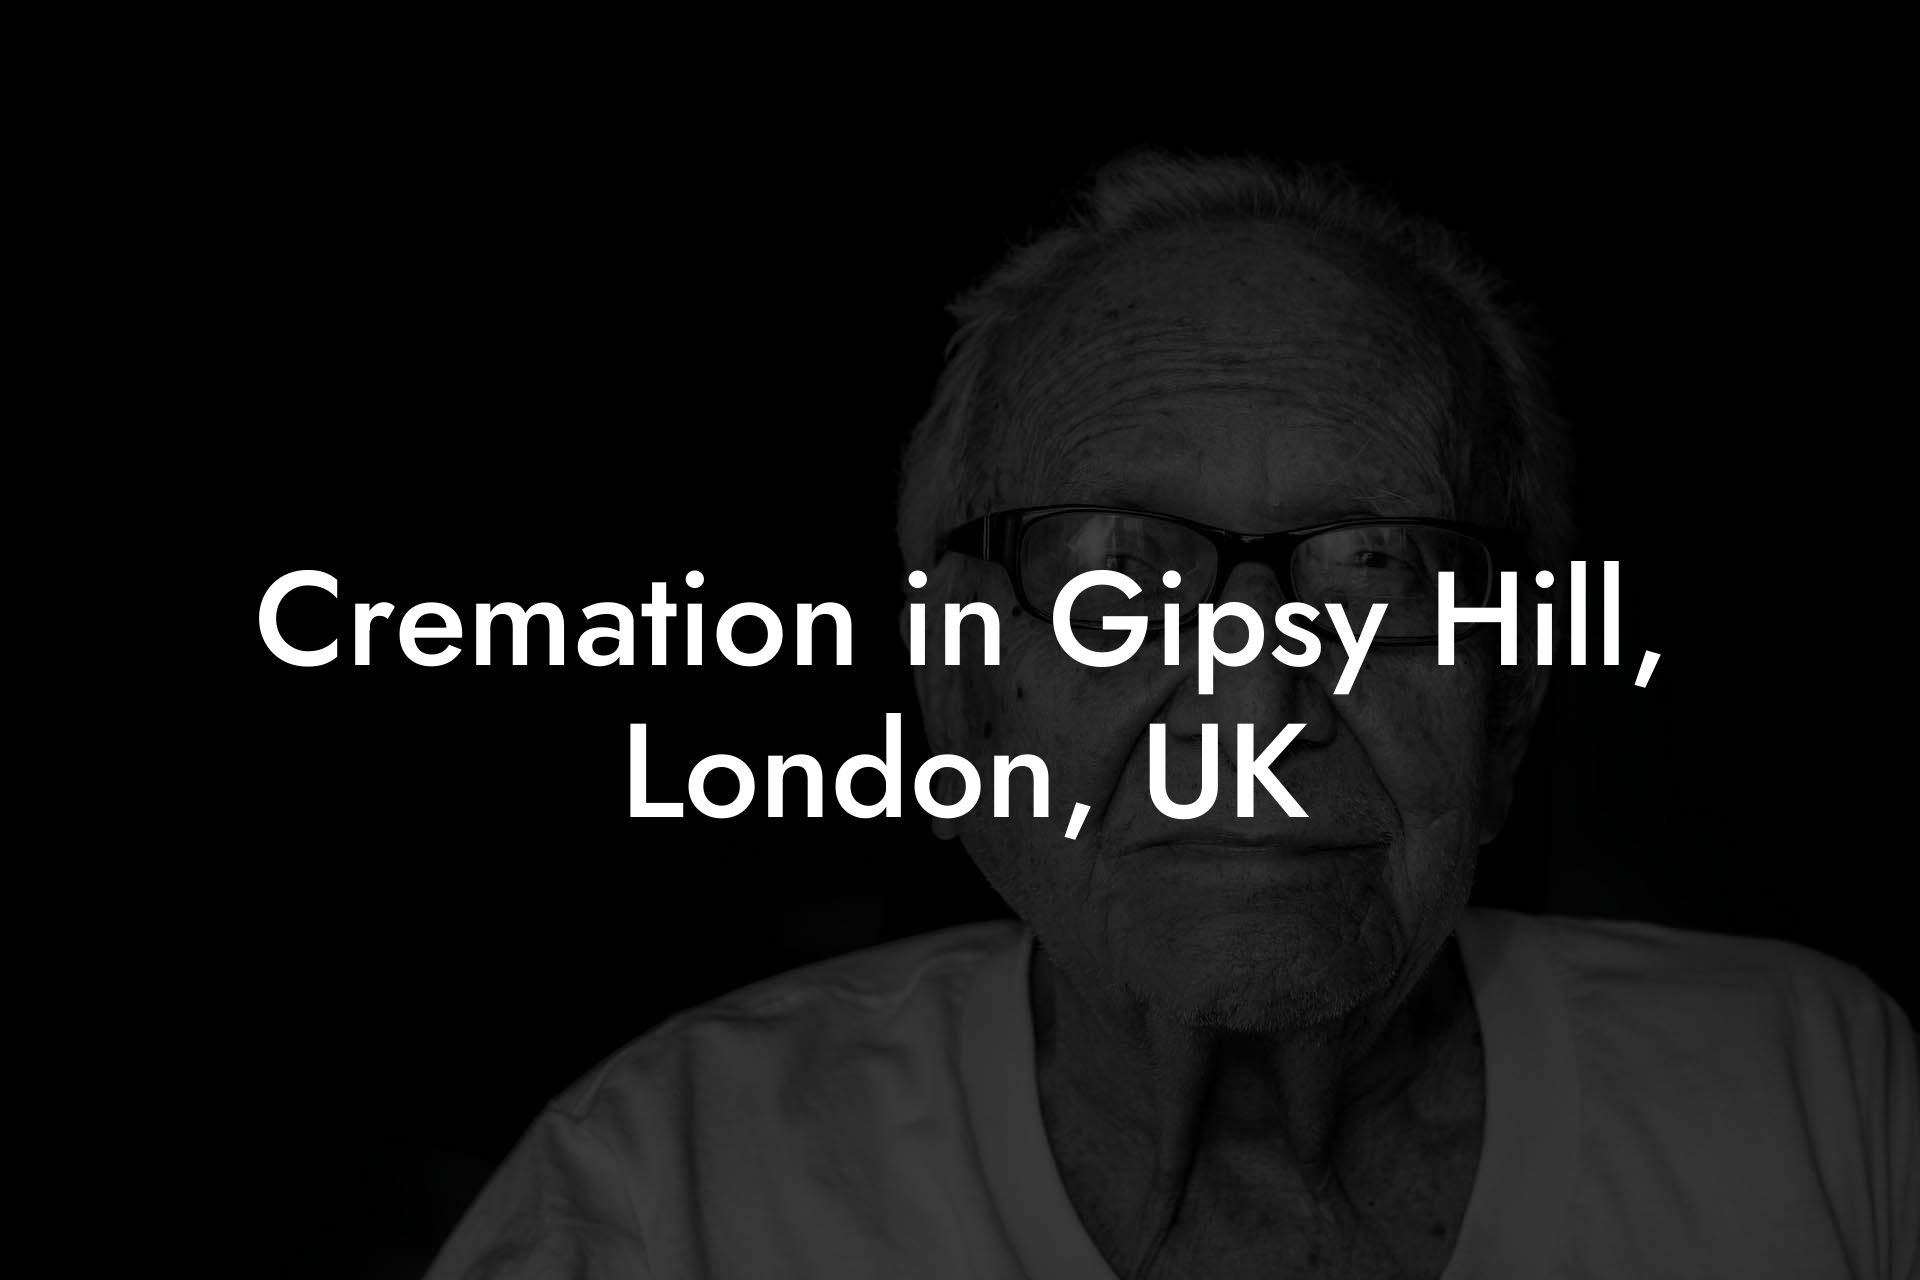 Cremation in Gipsy Hill, London, UK